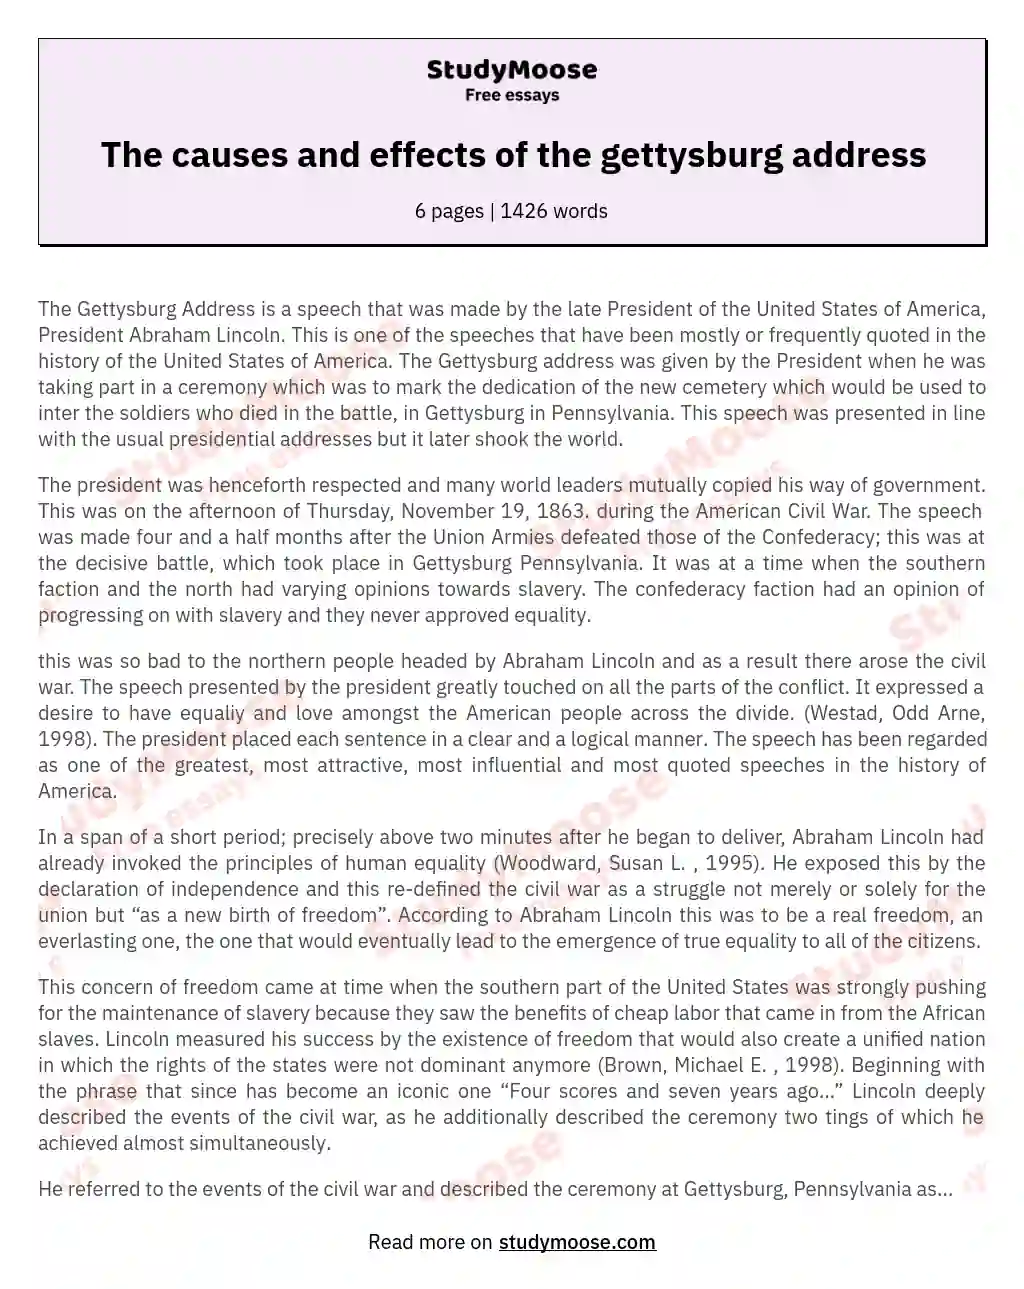 The causes and effects of the gettysburg address